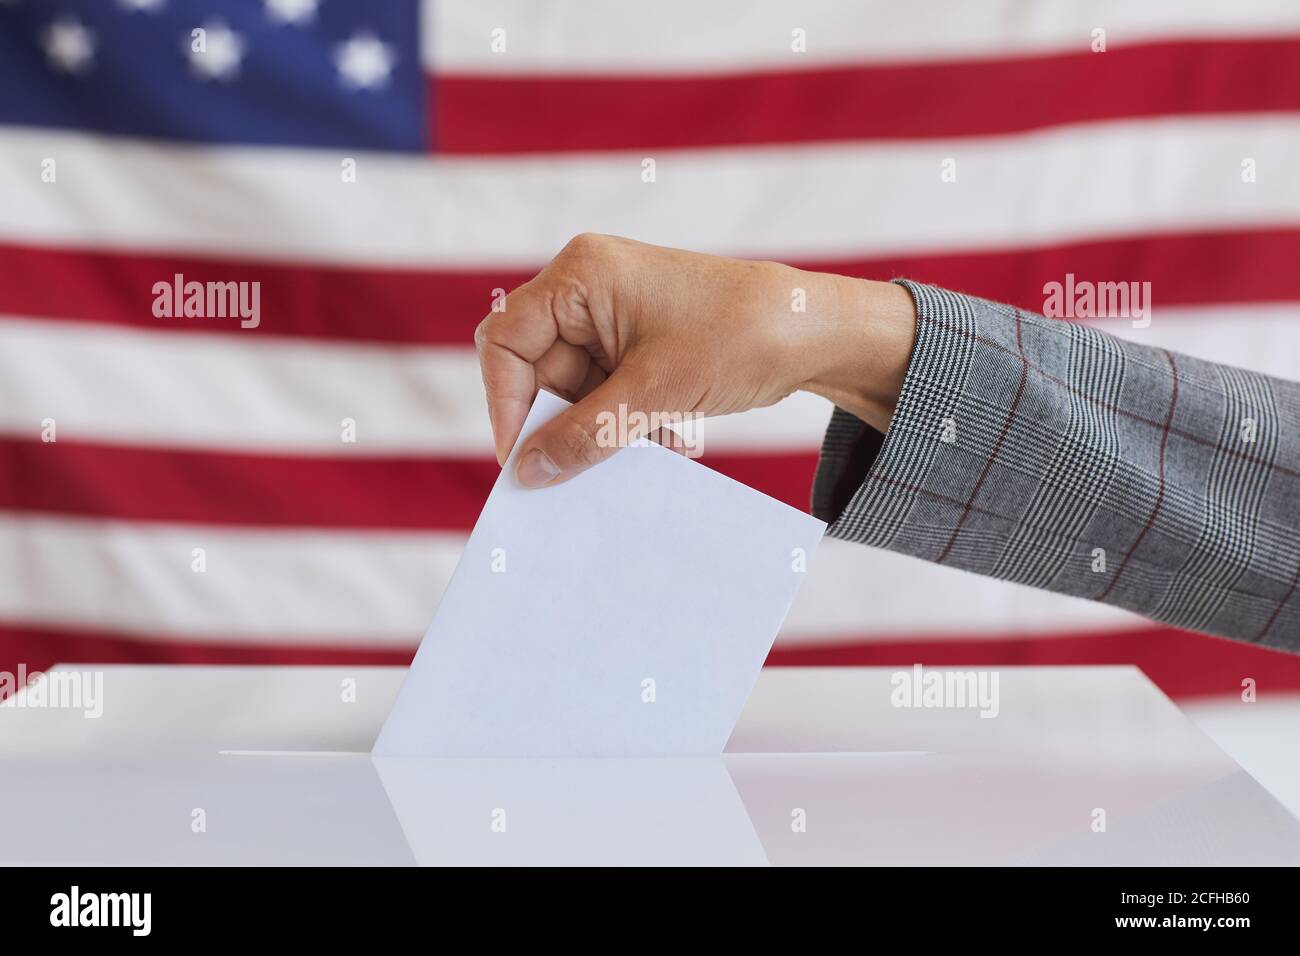 Side view close up of unrecognizable woman putting vote bulletin in ballot box while standing against American flag on election day, copy space Stock Photo